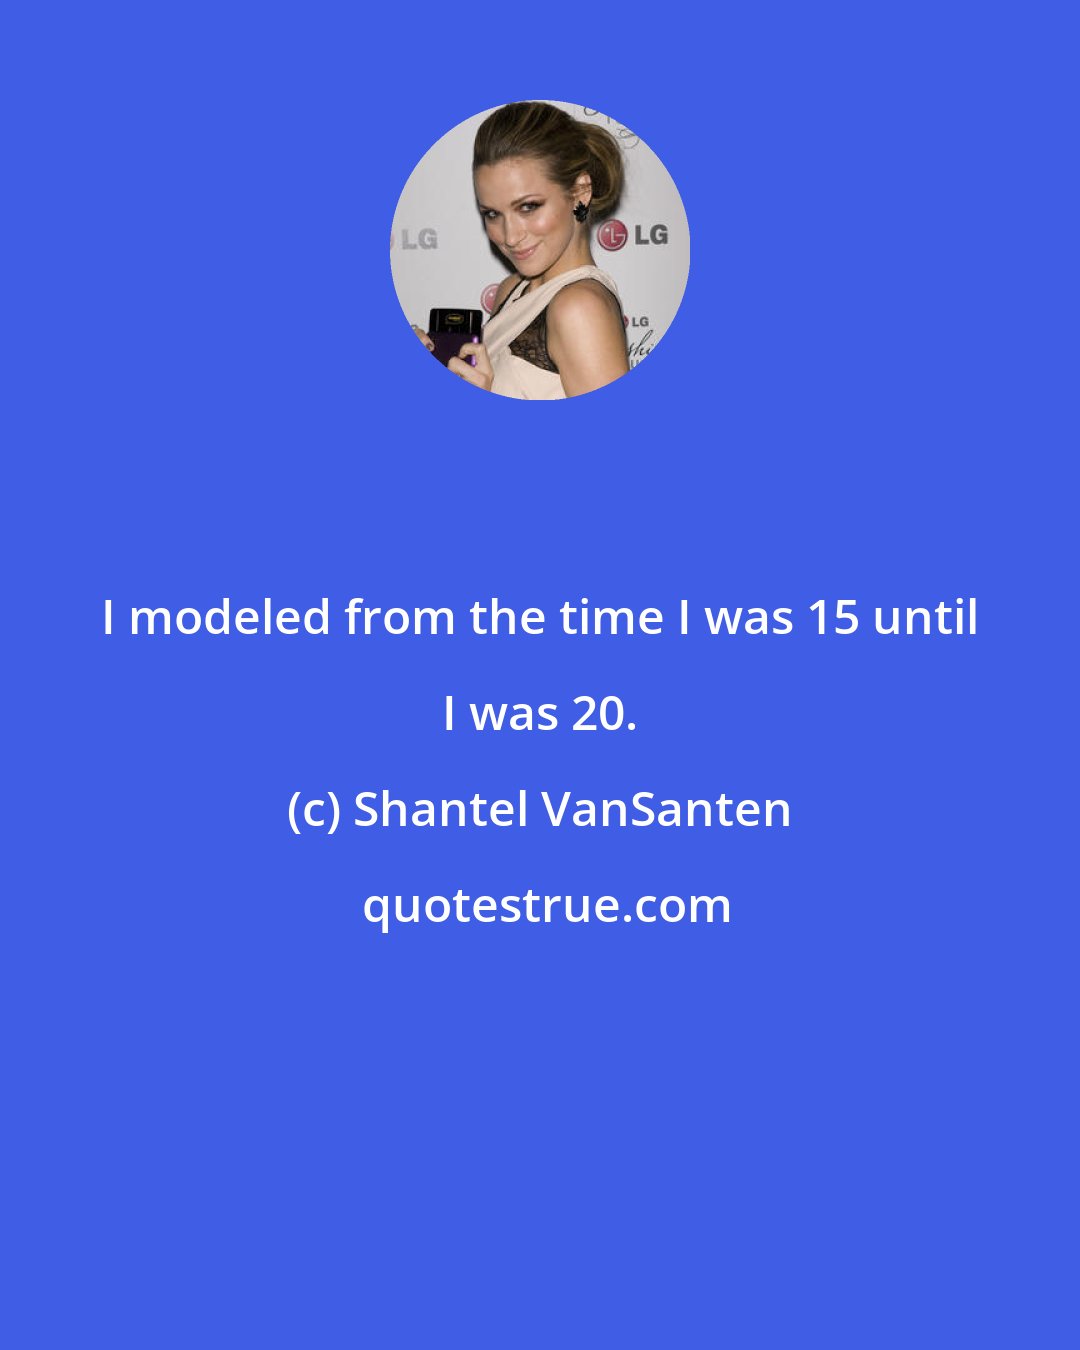 Shantel VanSanten: I modeled from the time I was 15 until I was 20.